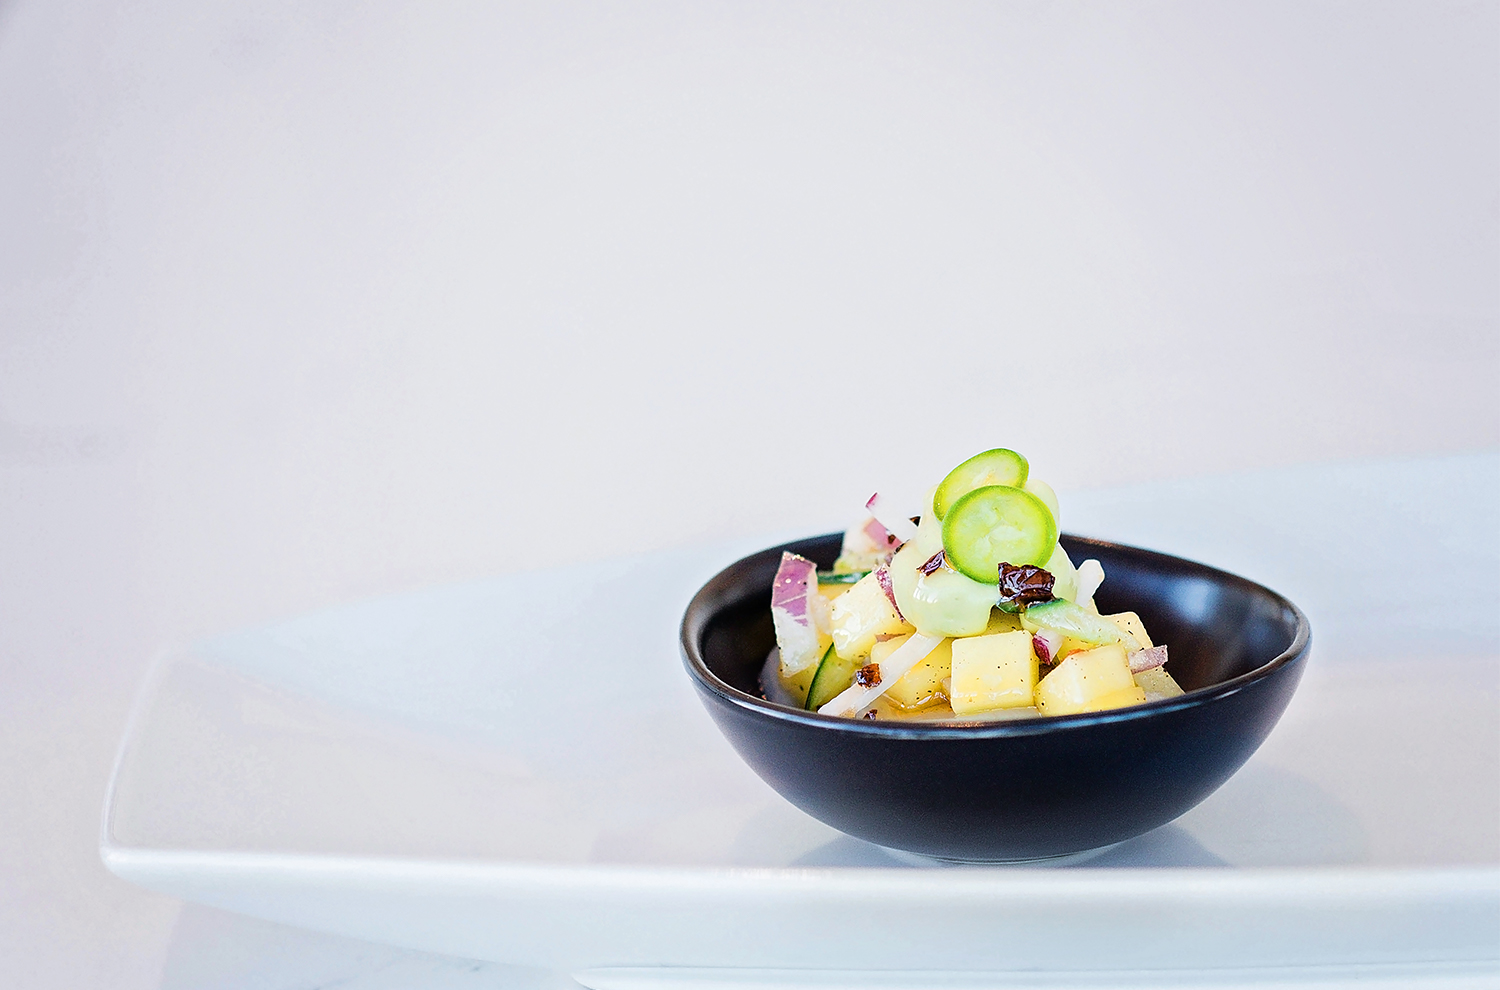 Scallop Ceviche Crudo with Avocado Mousse and Spicy Mango Salsa